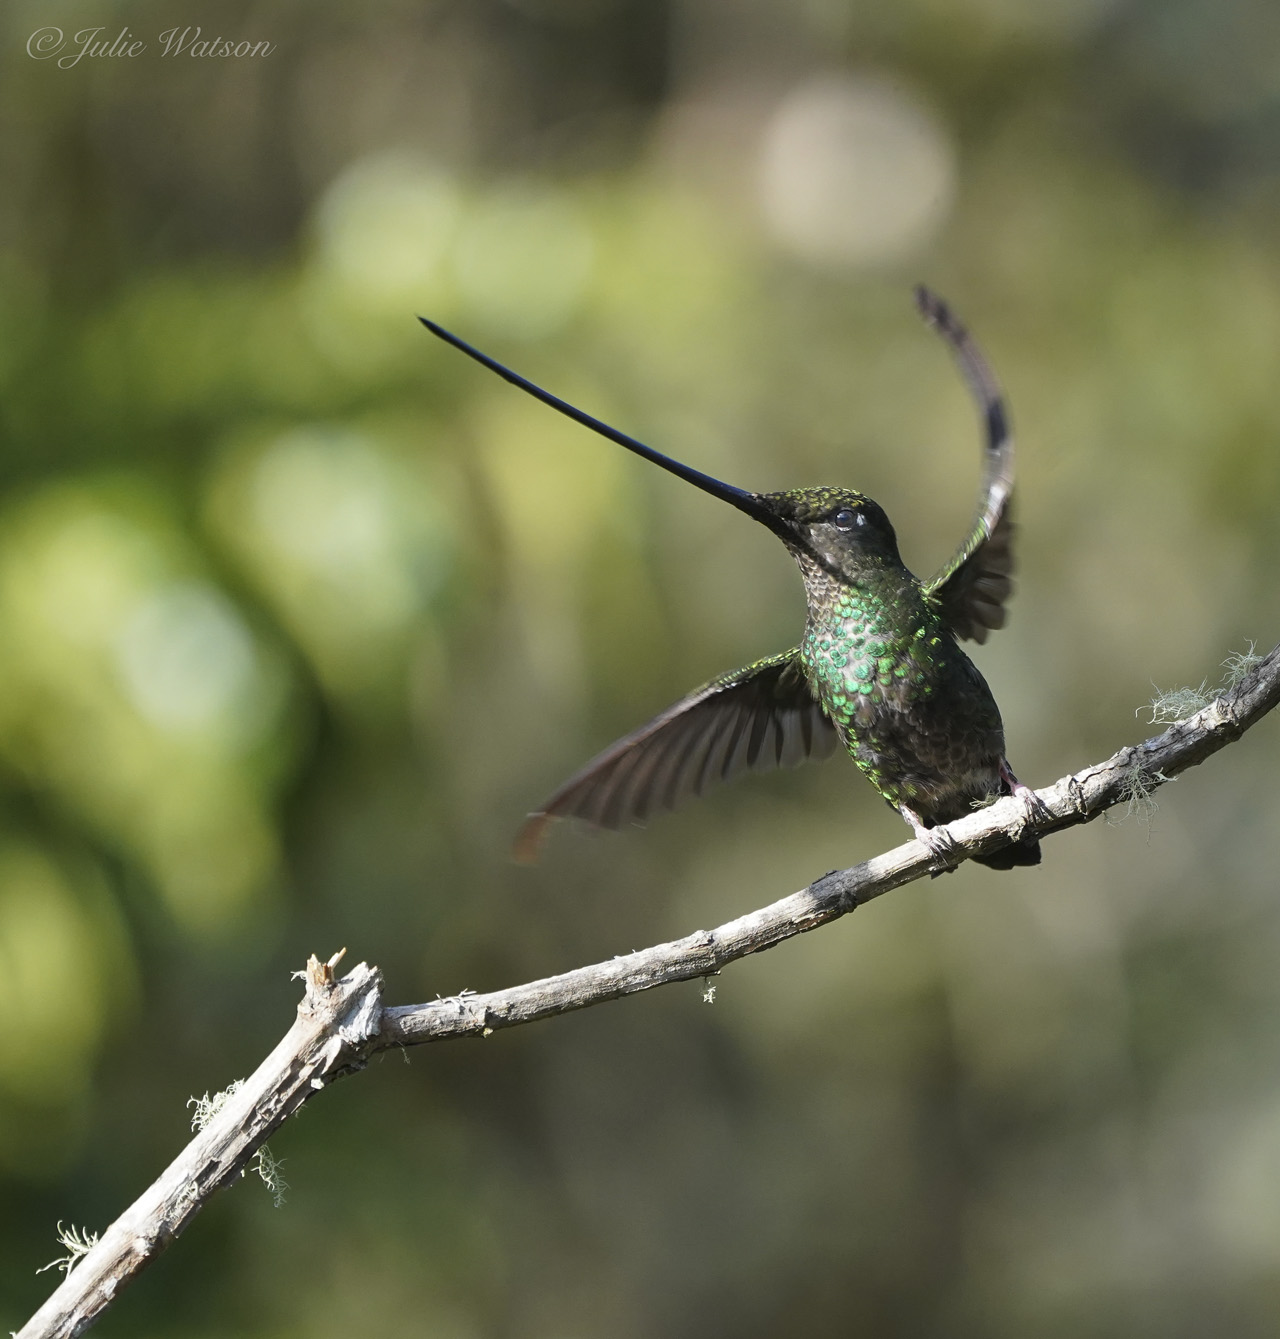 Swordbilled Hummingbird, with the largest bill compared to body size, of any bird.